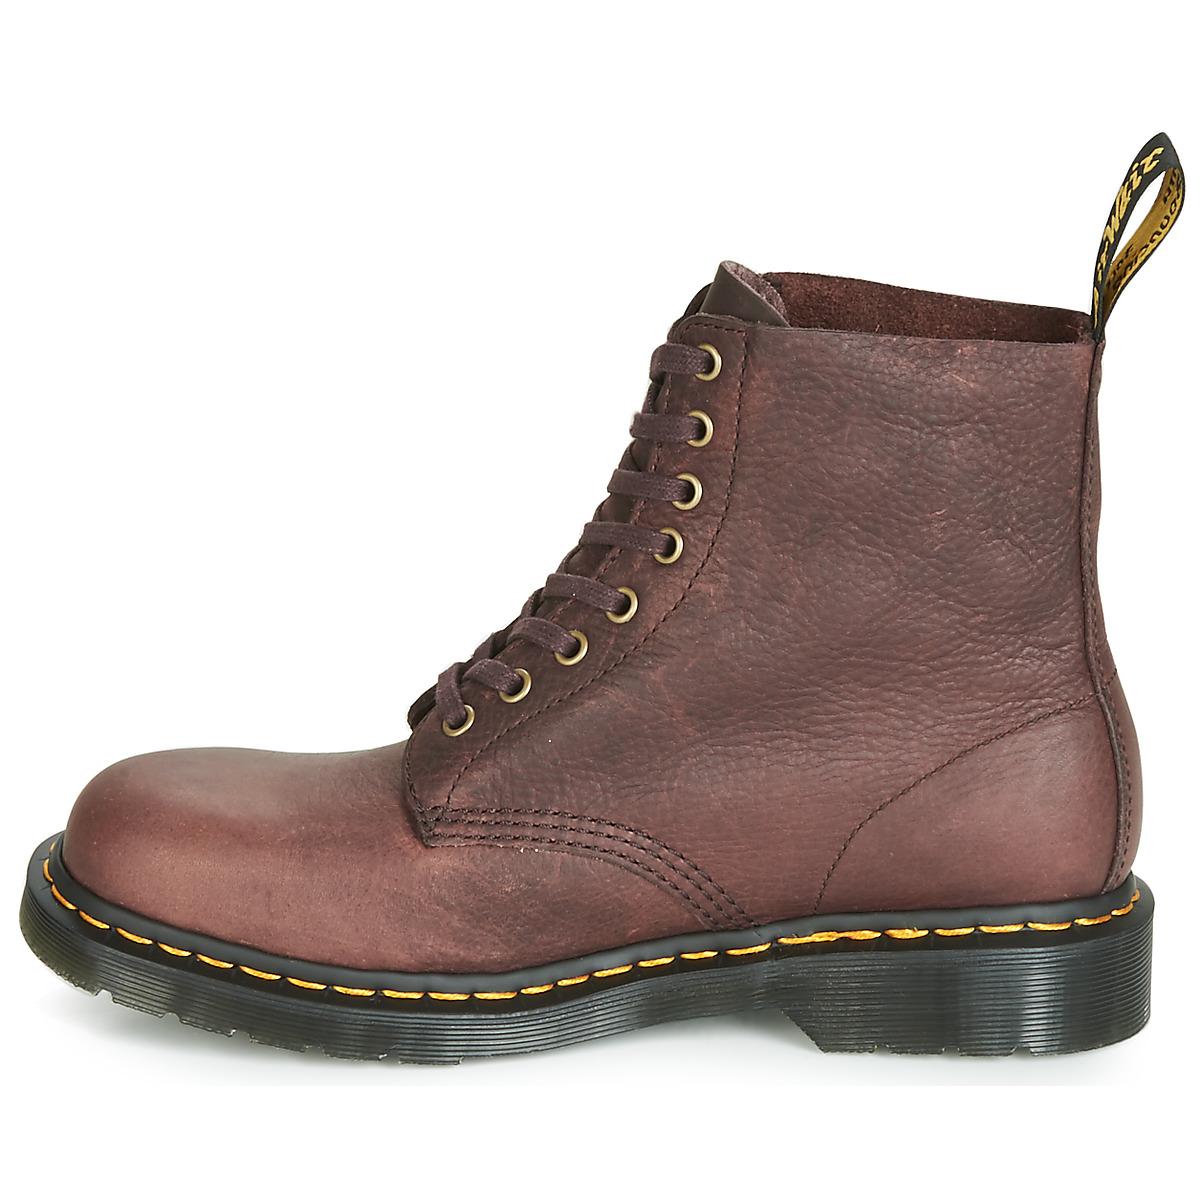 Dr. Martens 1460 Ambassador Soft Leather Pascal 8-eye Boots in Brown for  Men - Save 50% - Lyst